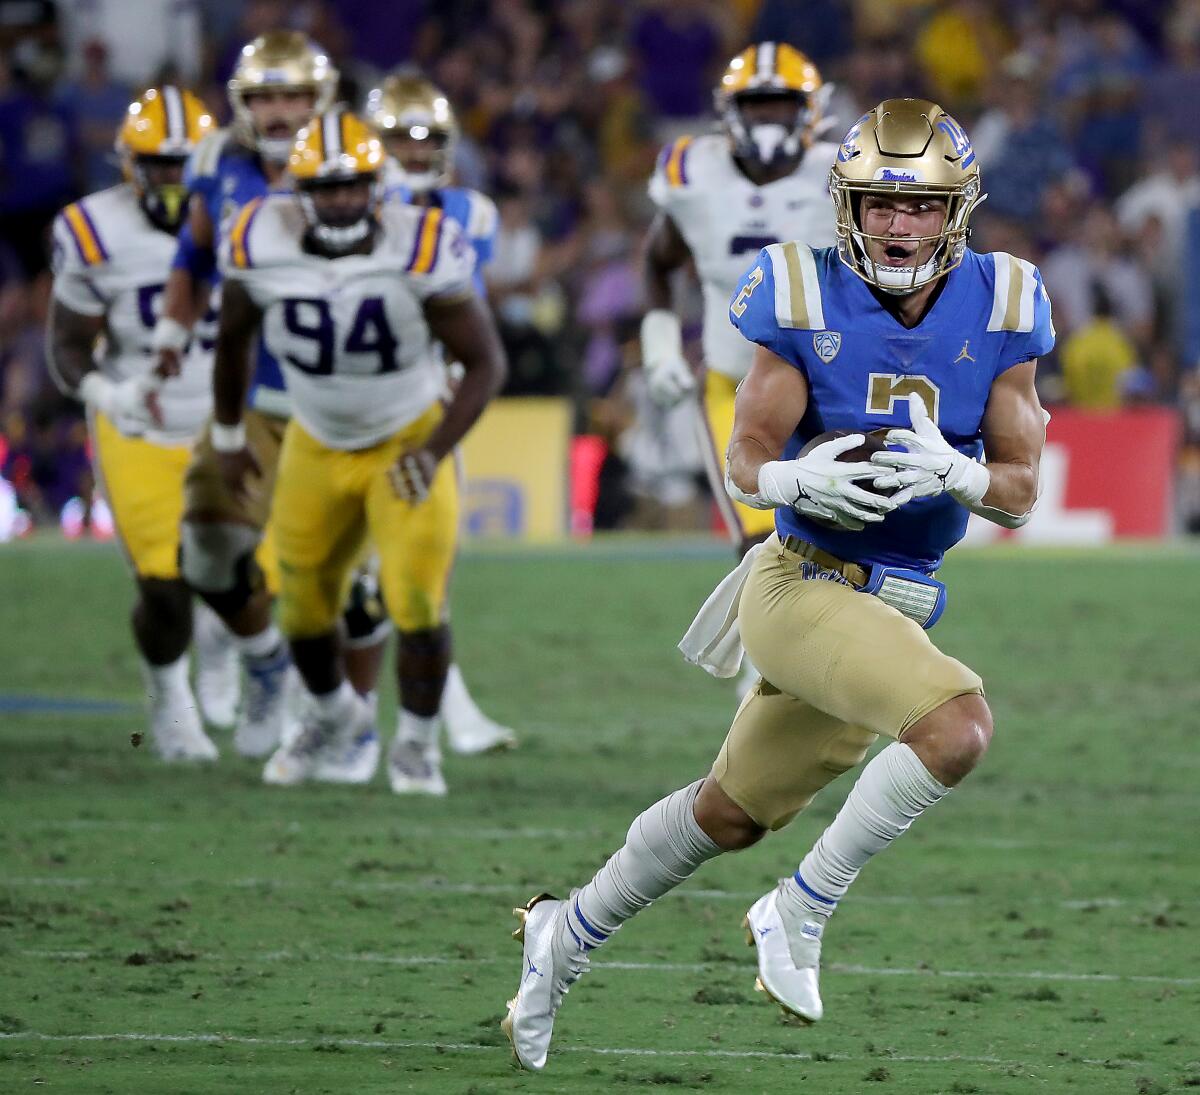 UCLA wide receiver Kyle Philips turns upfield for a touchdown run after making a catch against LSU.